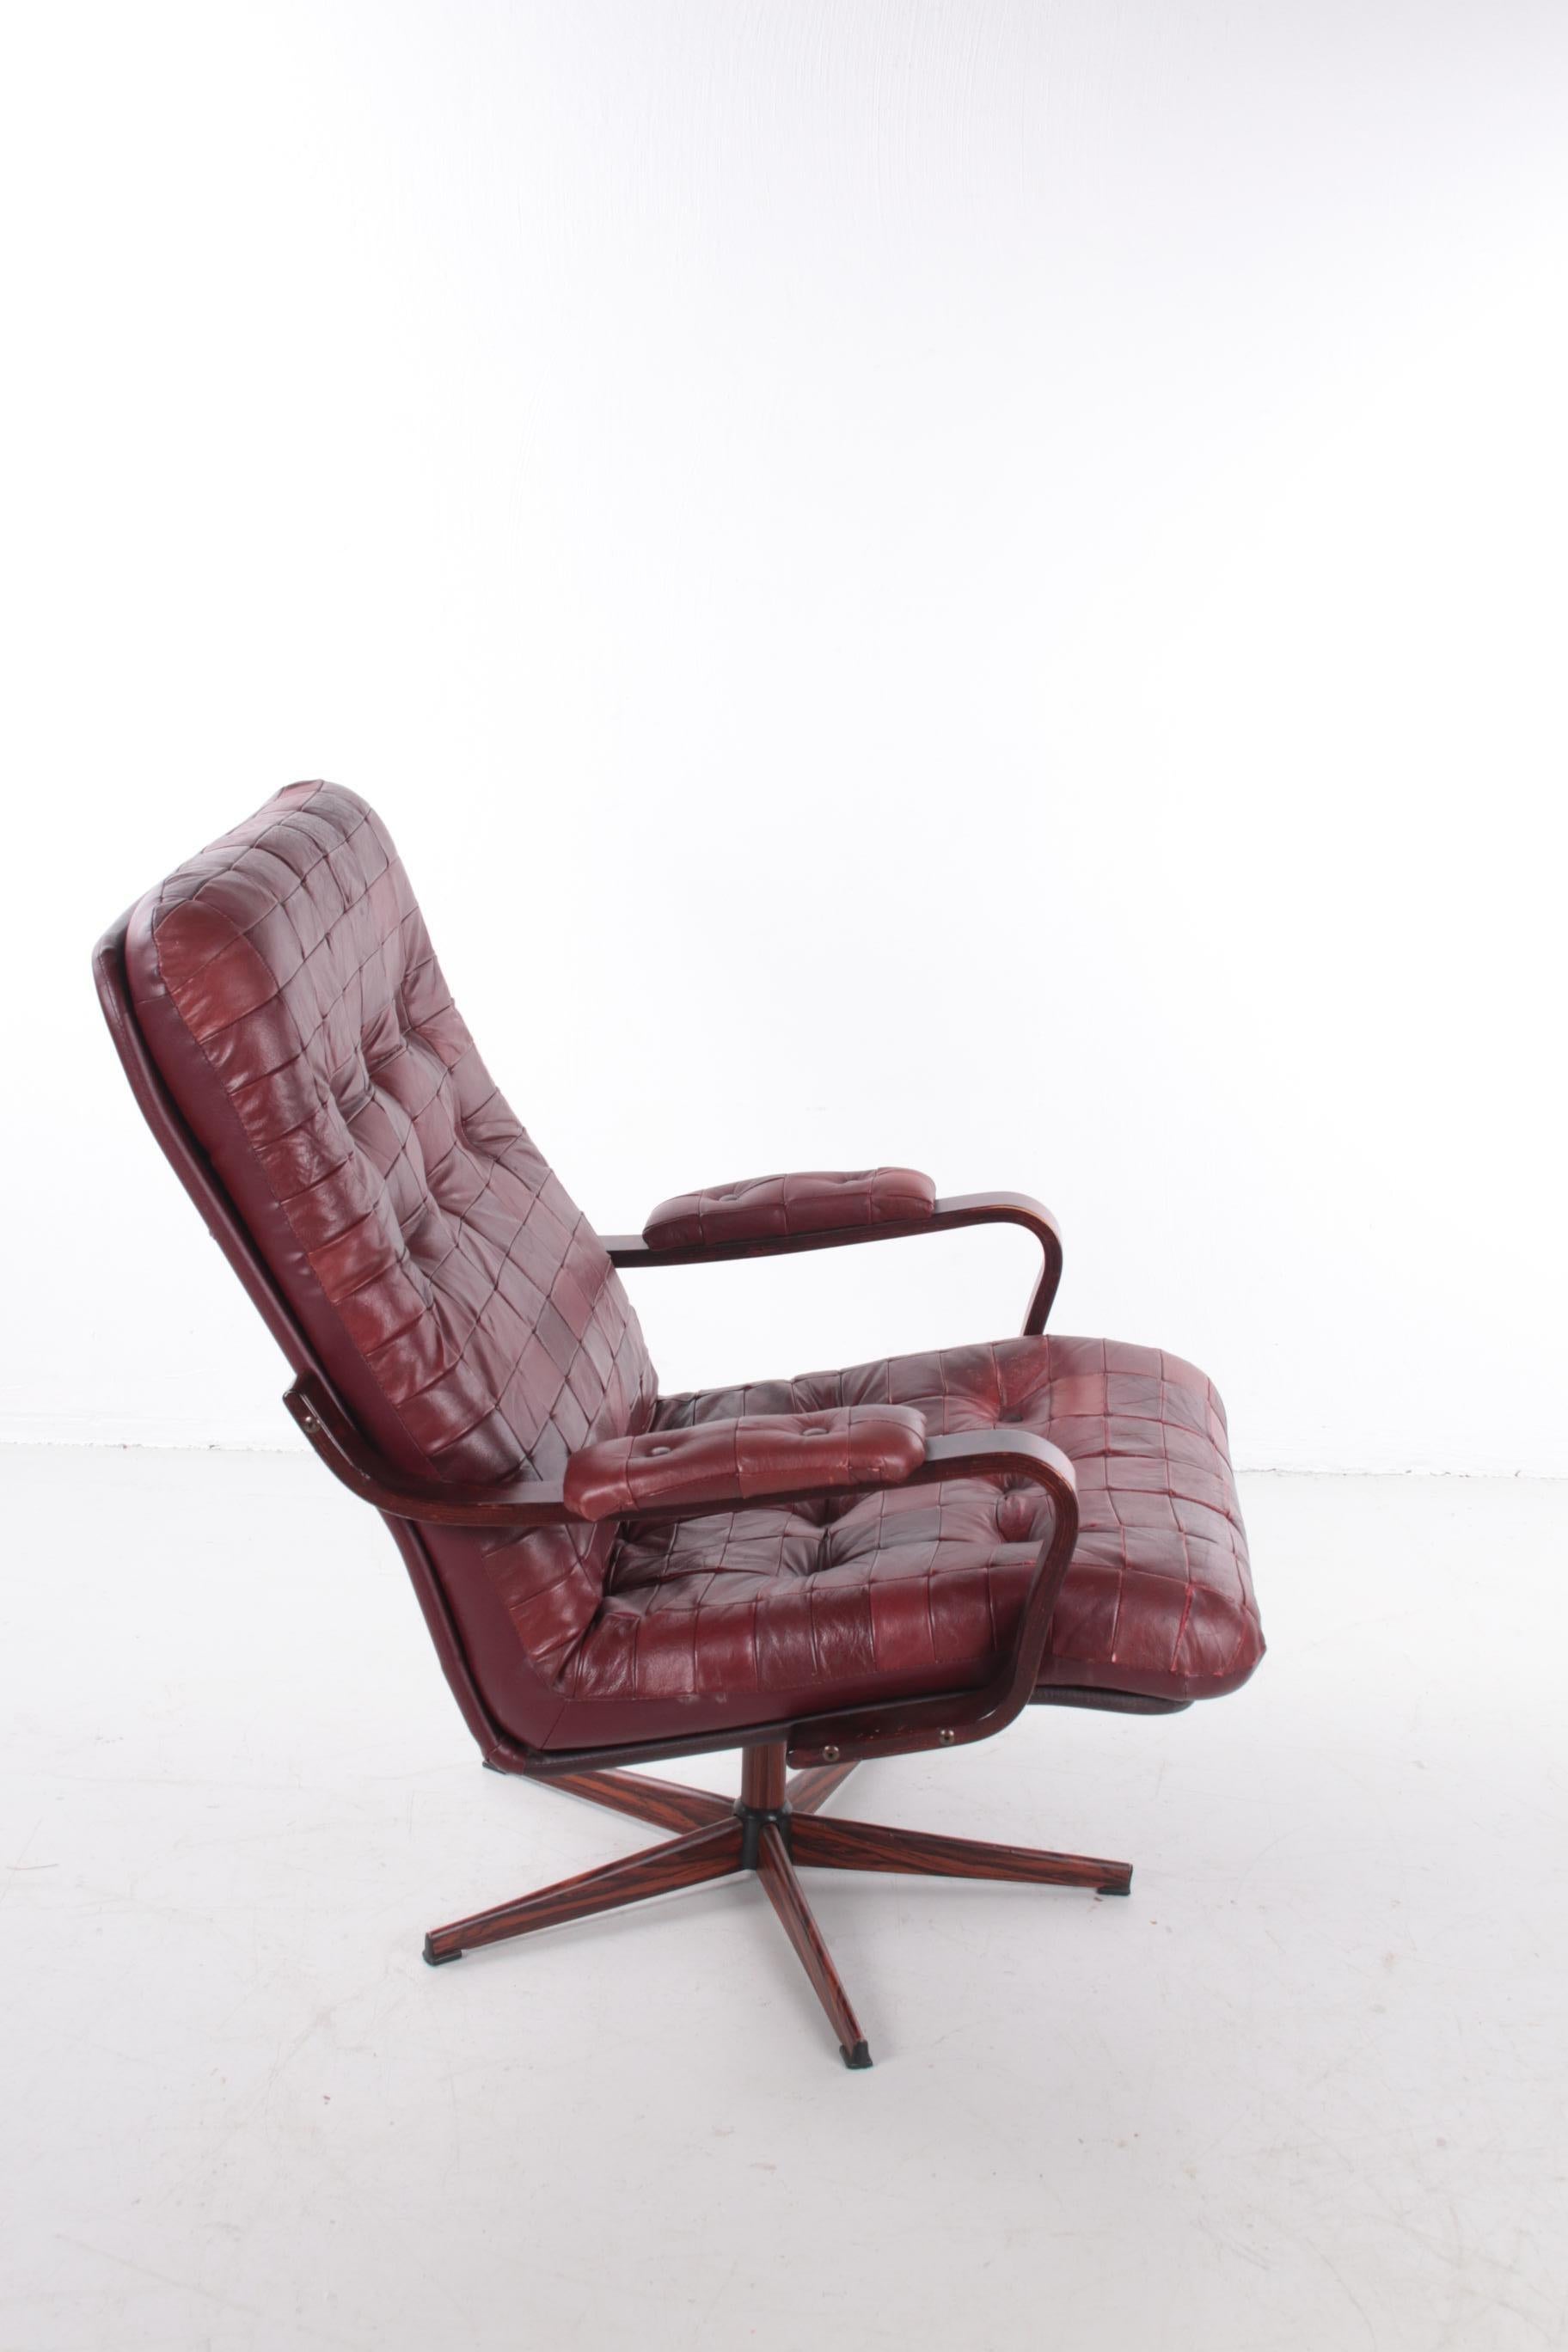 A beautiful vintage armchair in the style of De Sede. This chair was made in Sweden around the 1970s.

The chair is upholstered in a collection of deep red leather patches. The deep red color, the checkered pattern and the grain of the wood give the